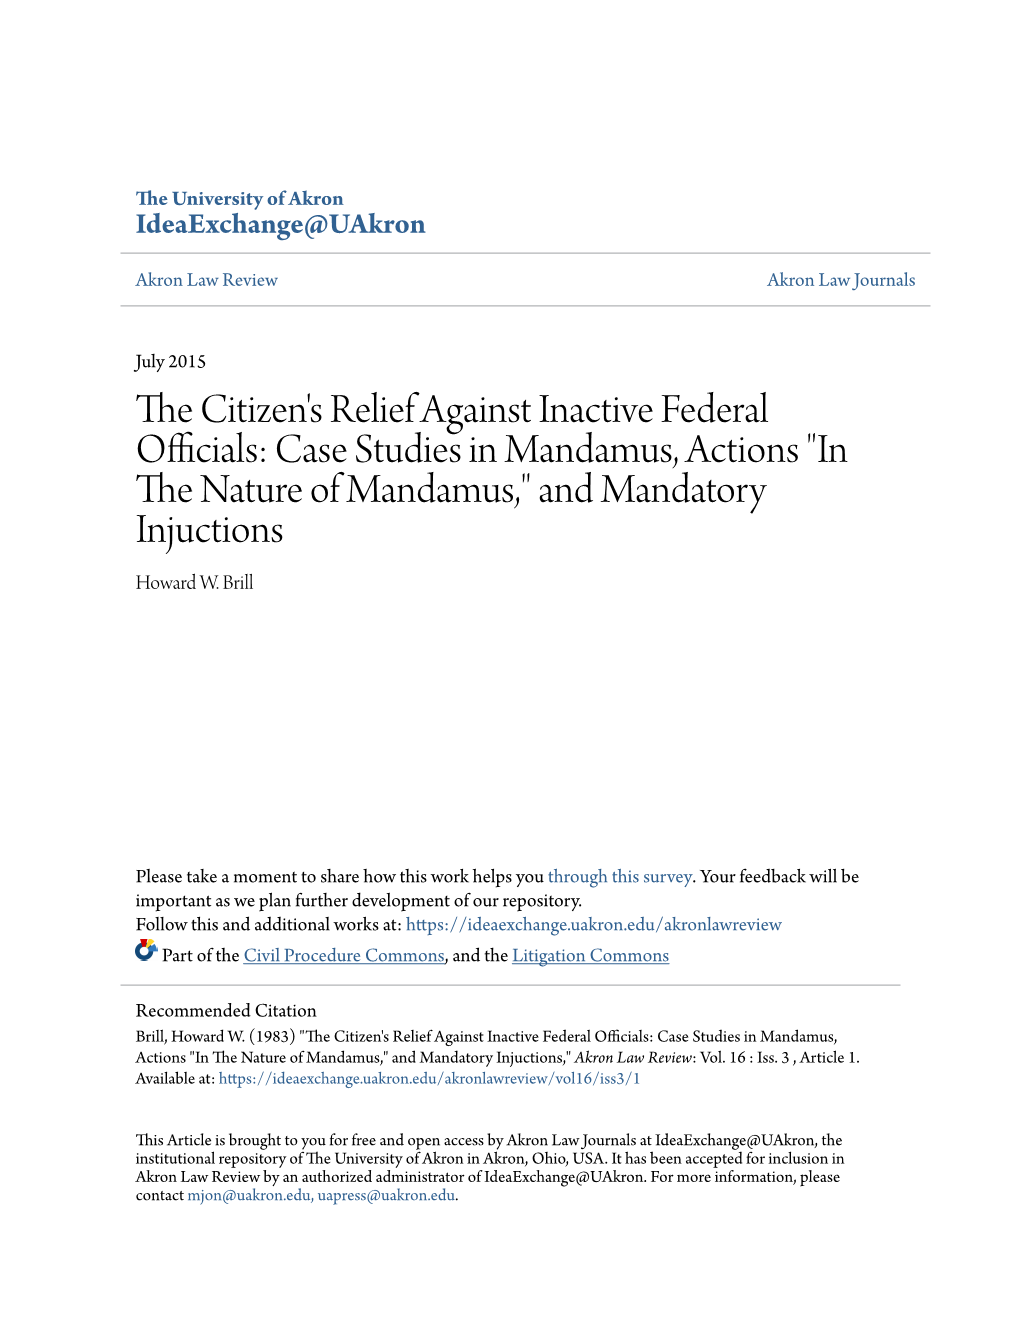 The Citizen's Relief Against Inactive Federal Officials: Case Studies in Mandamus, Actions "In the Nature of Mandamus," and Mandatory Injunctions